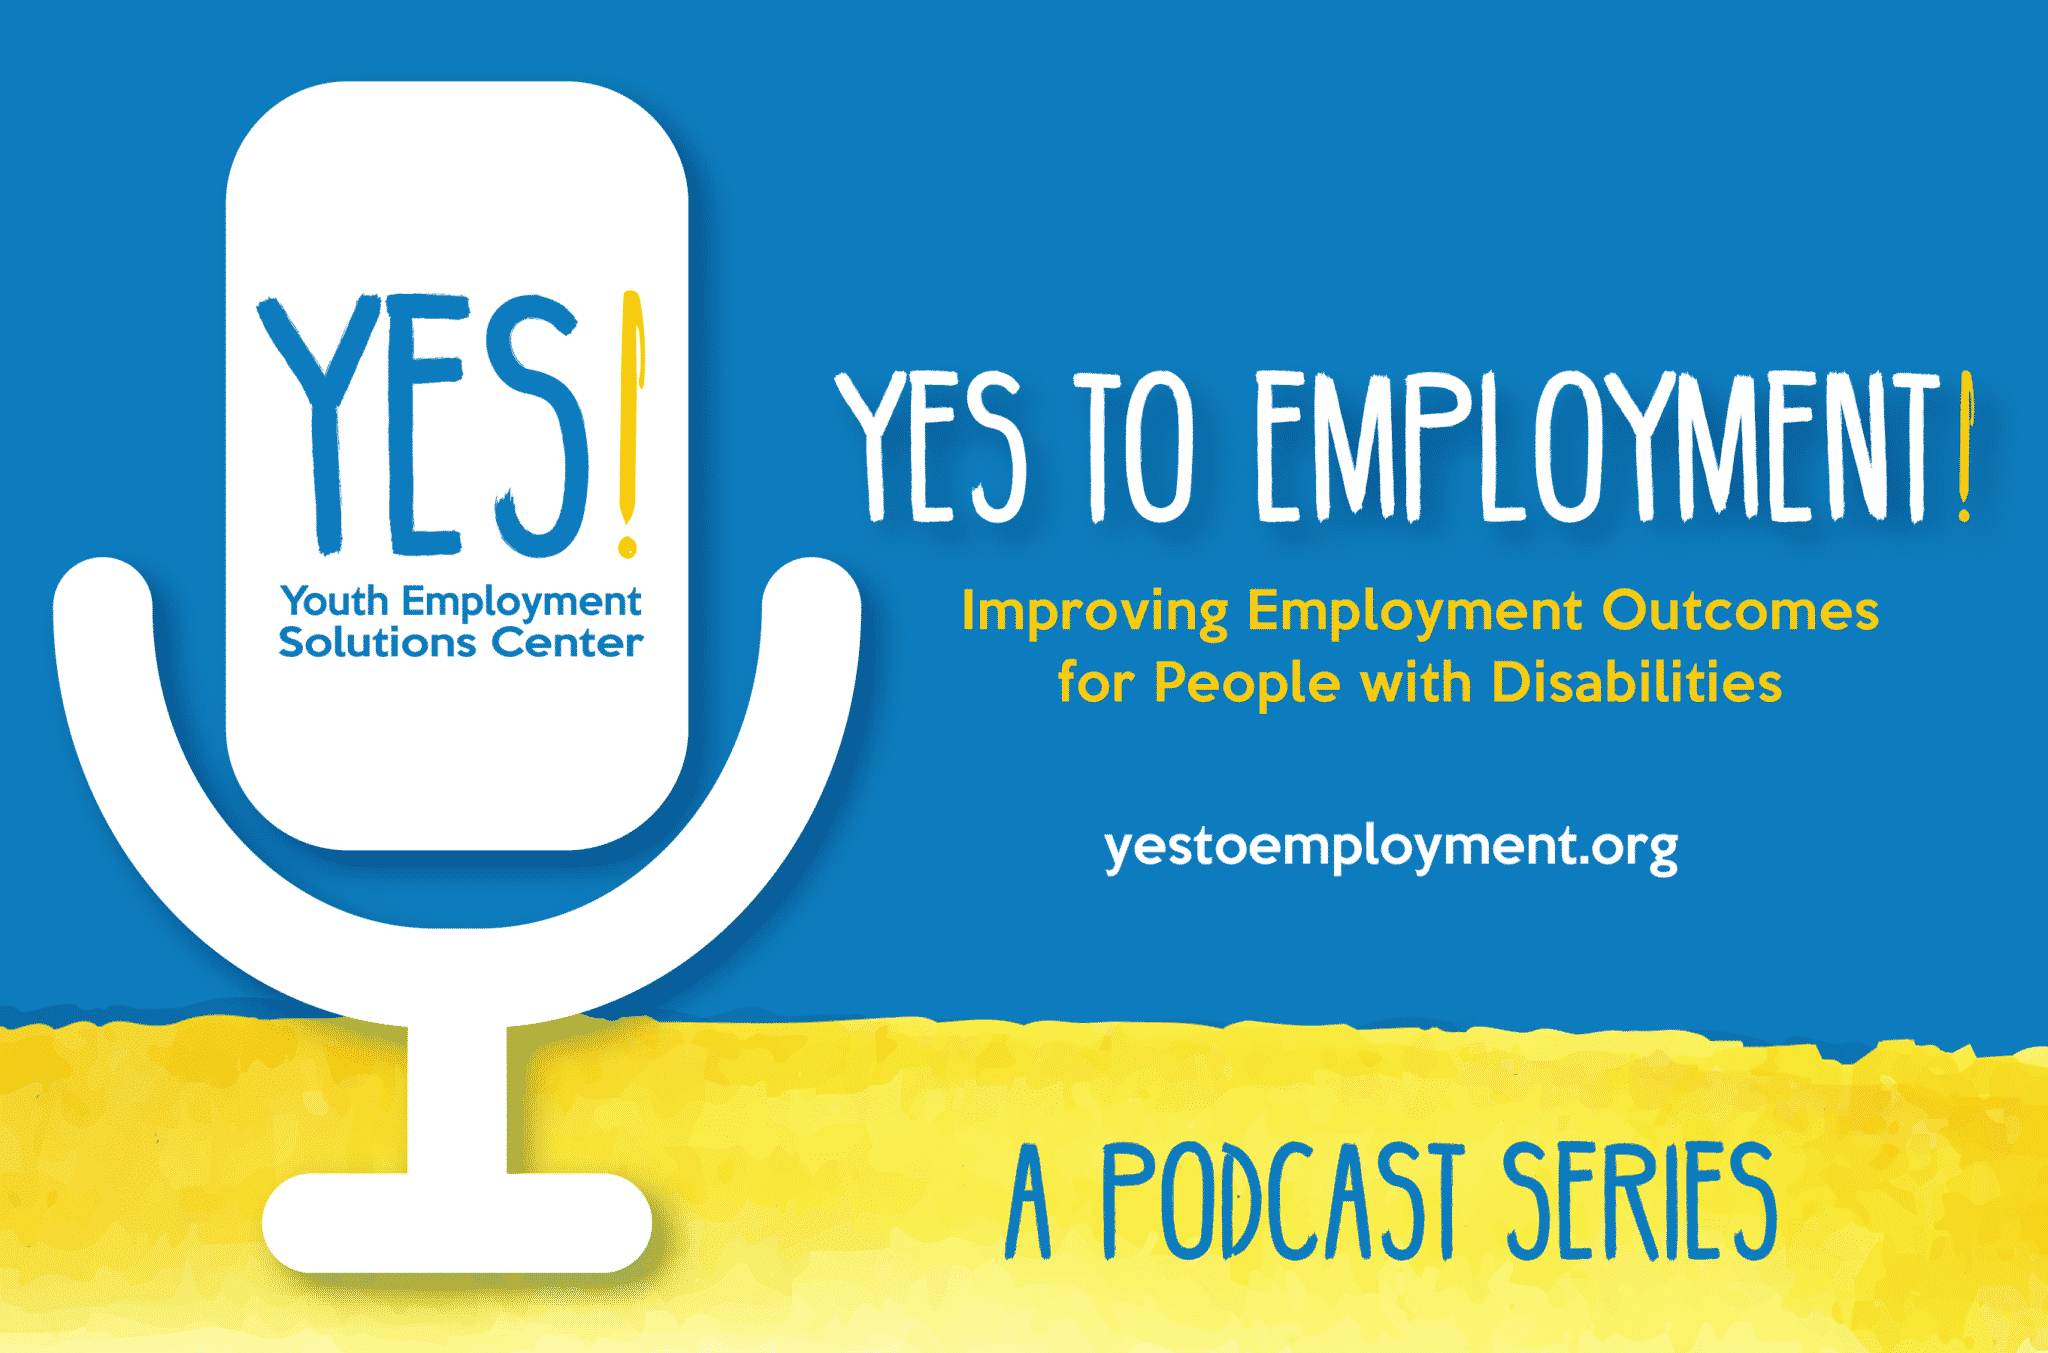 The YES! to Employment podcast logo: the silhouette of a table-top microphone against a blue and yellow background with the YES! Center logo, tagline and URL.